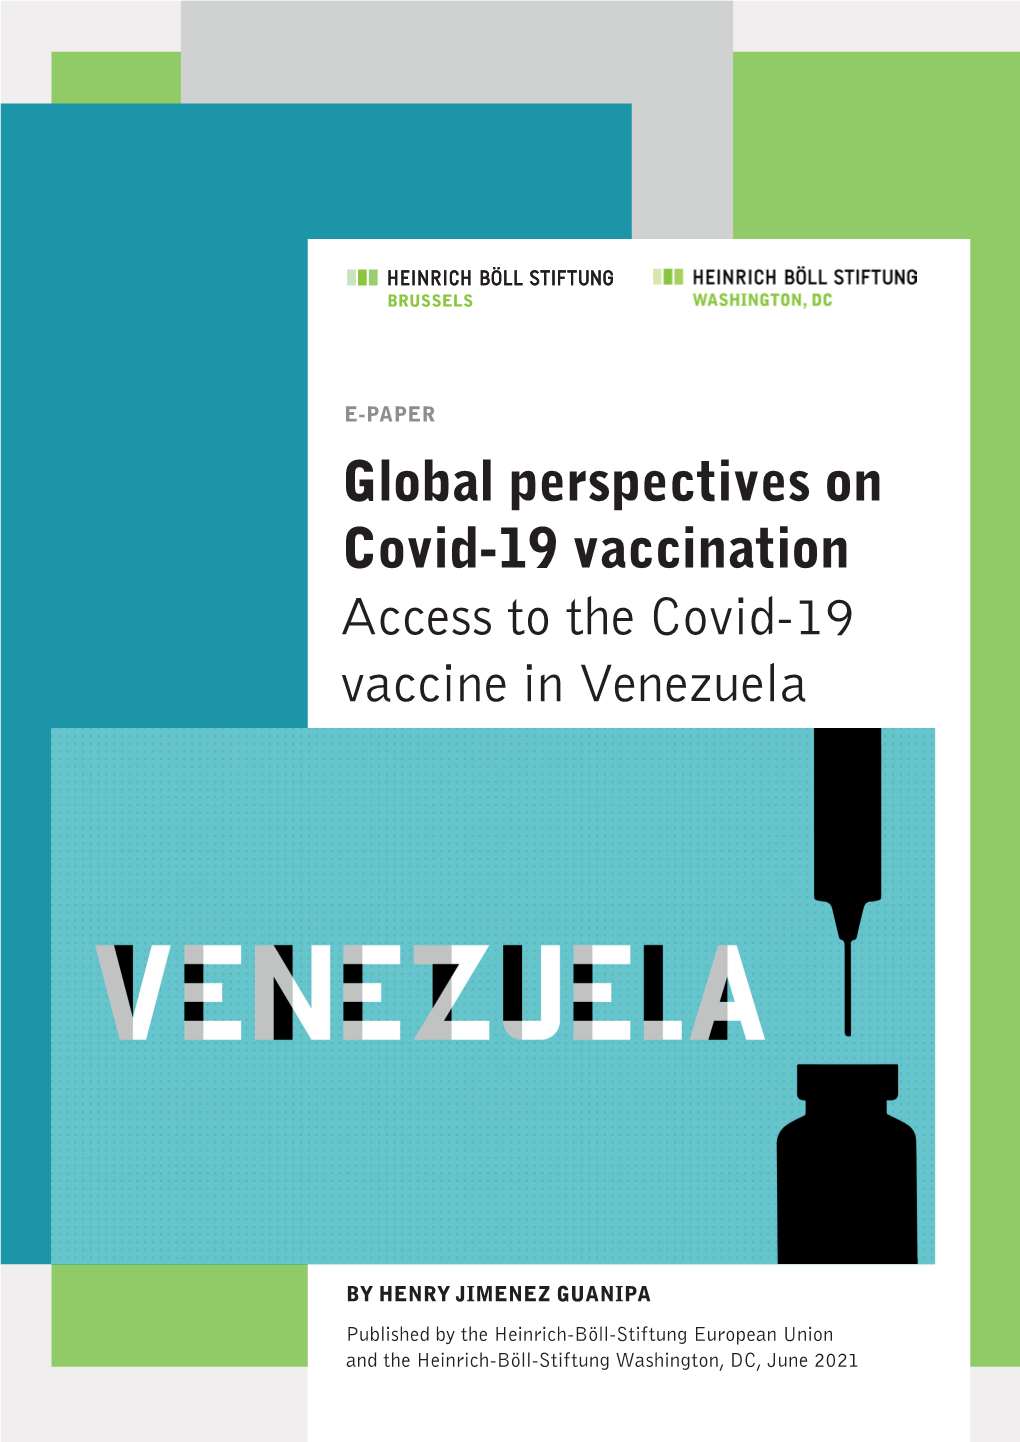 Global Perspectives on Covid-19 Vaccination Access to the Covid-19 Vaccine in Venezuela